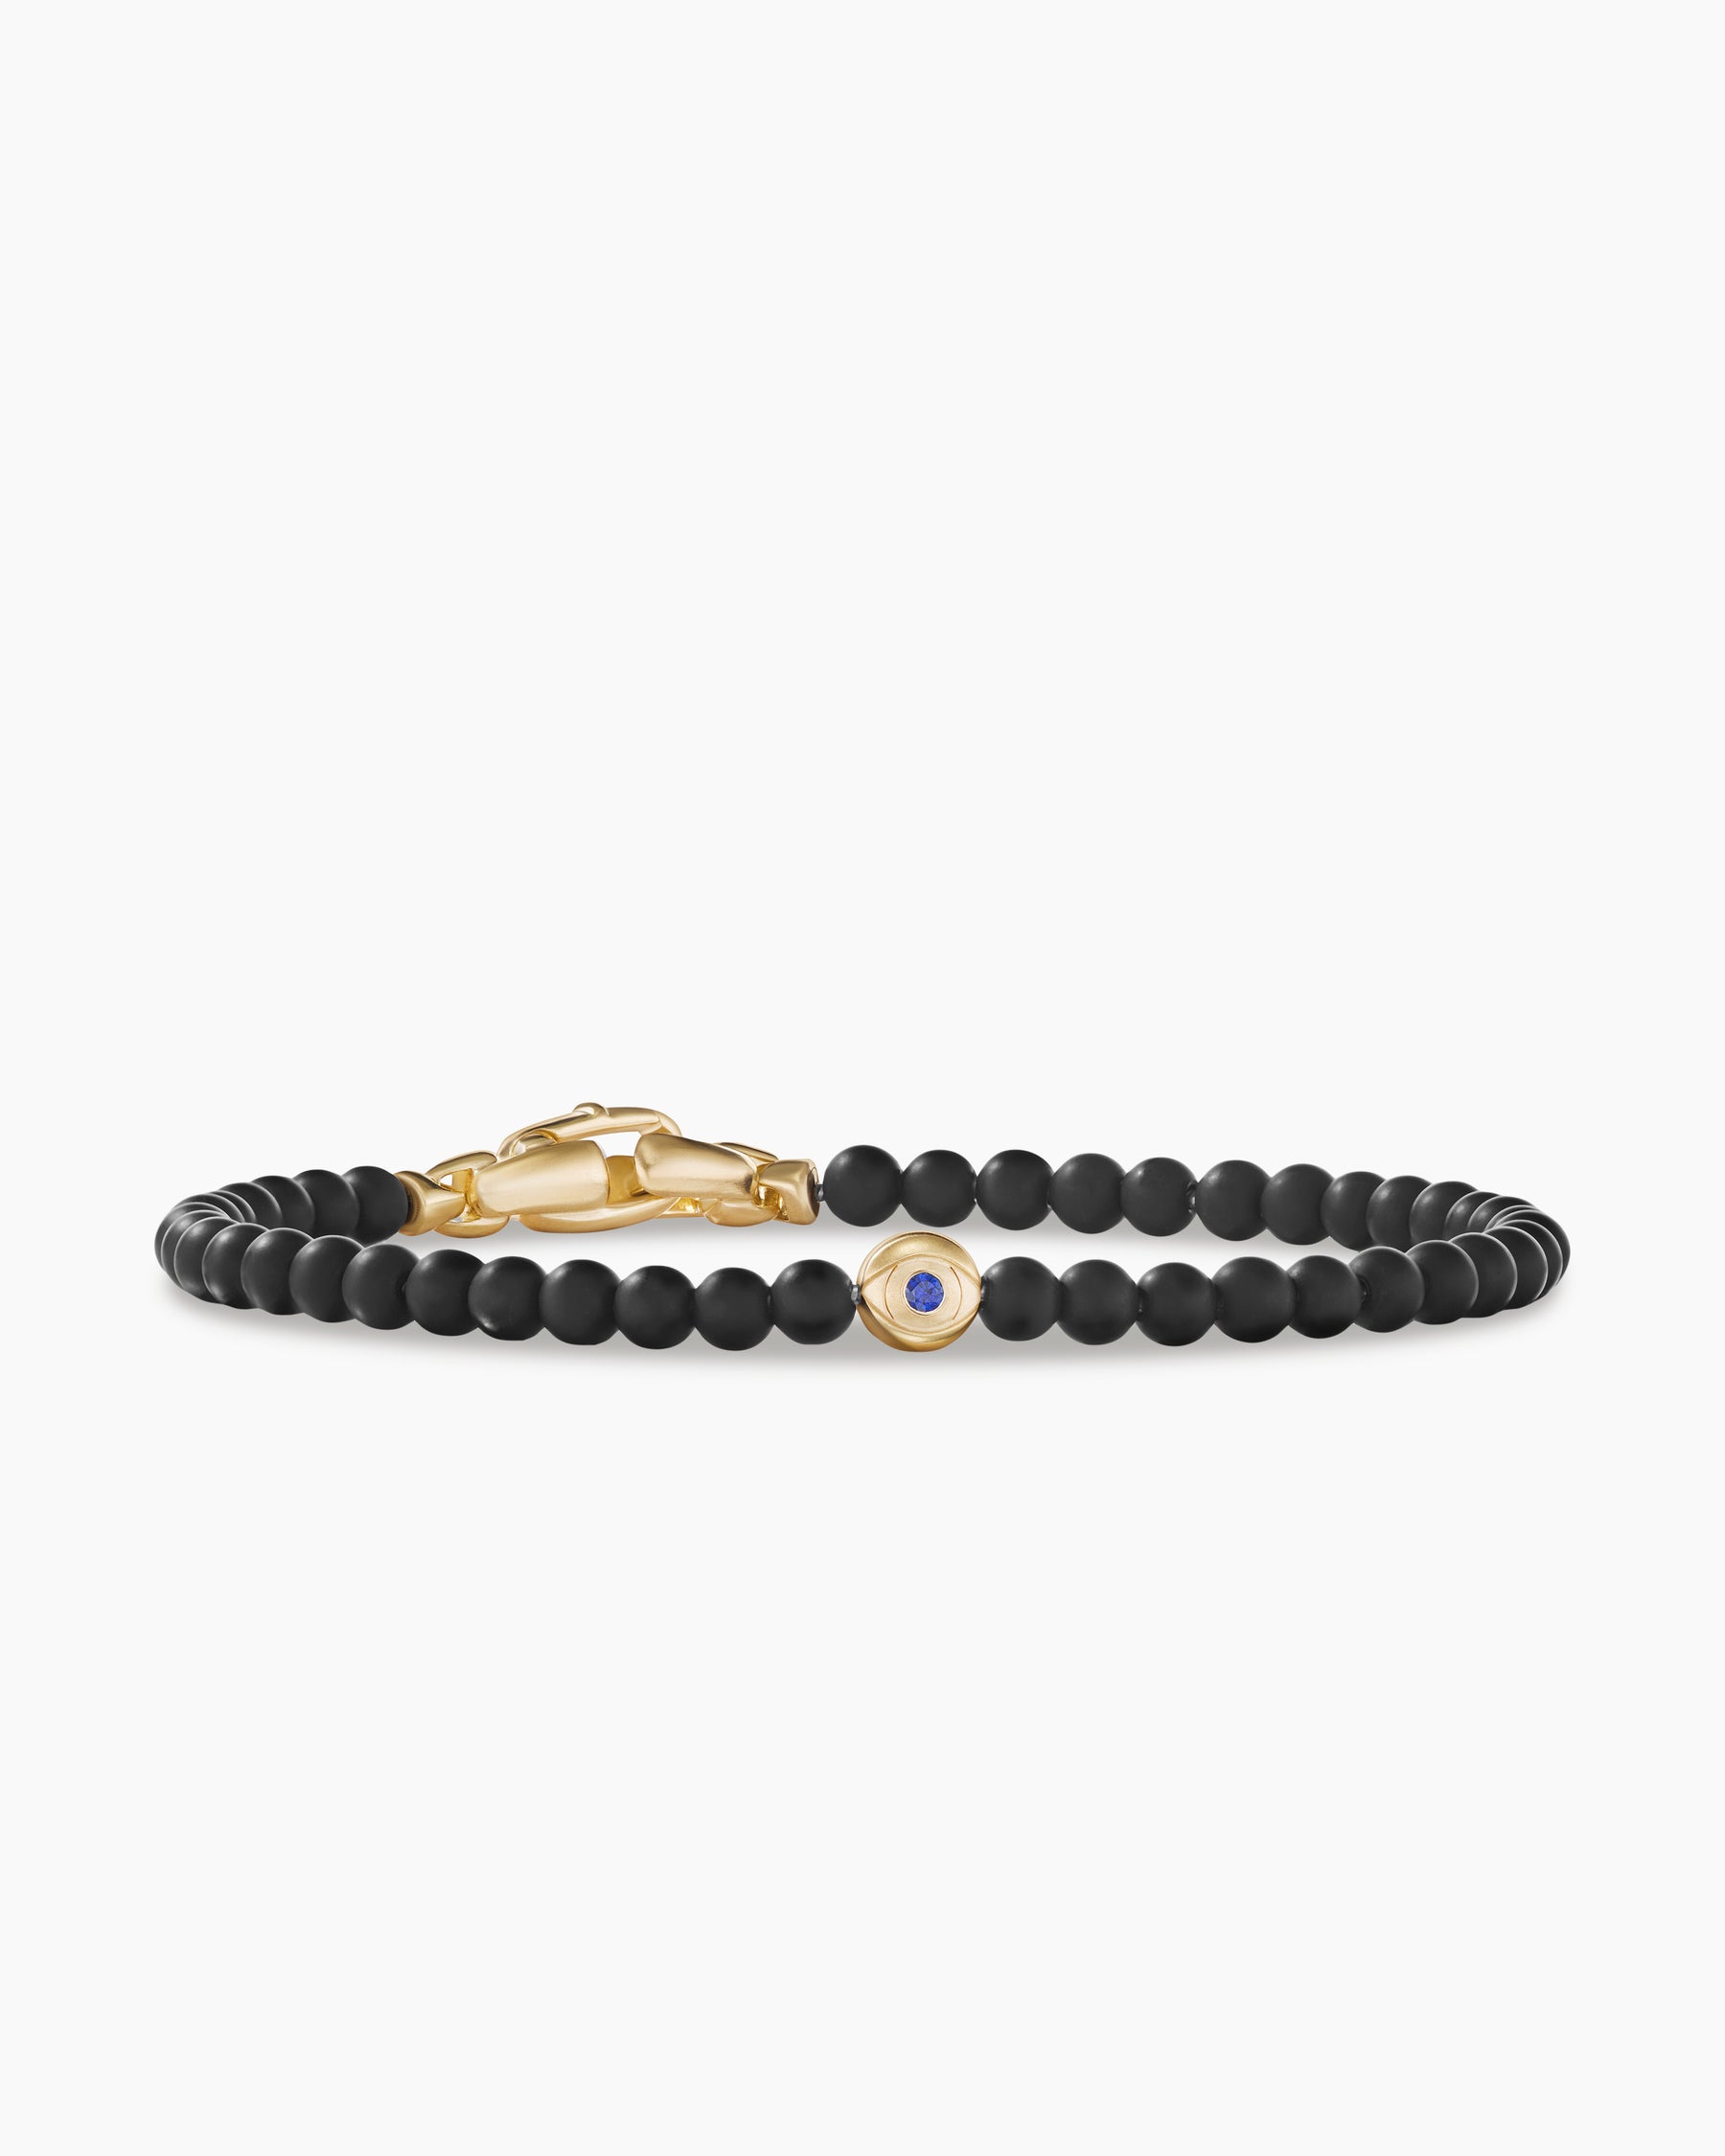 Latest Black Beads And Gold Beads Bracelet Designs With Weight And